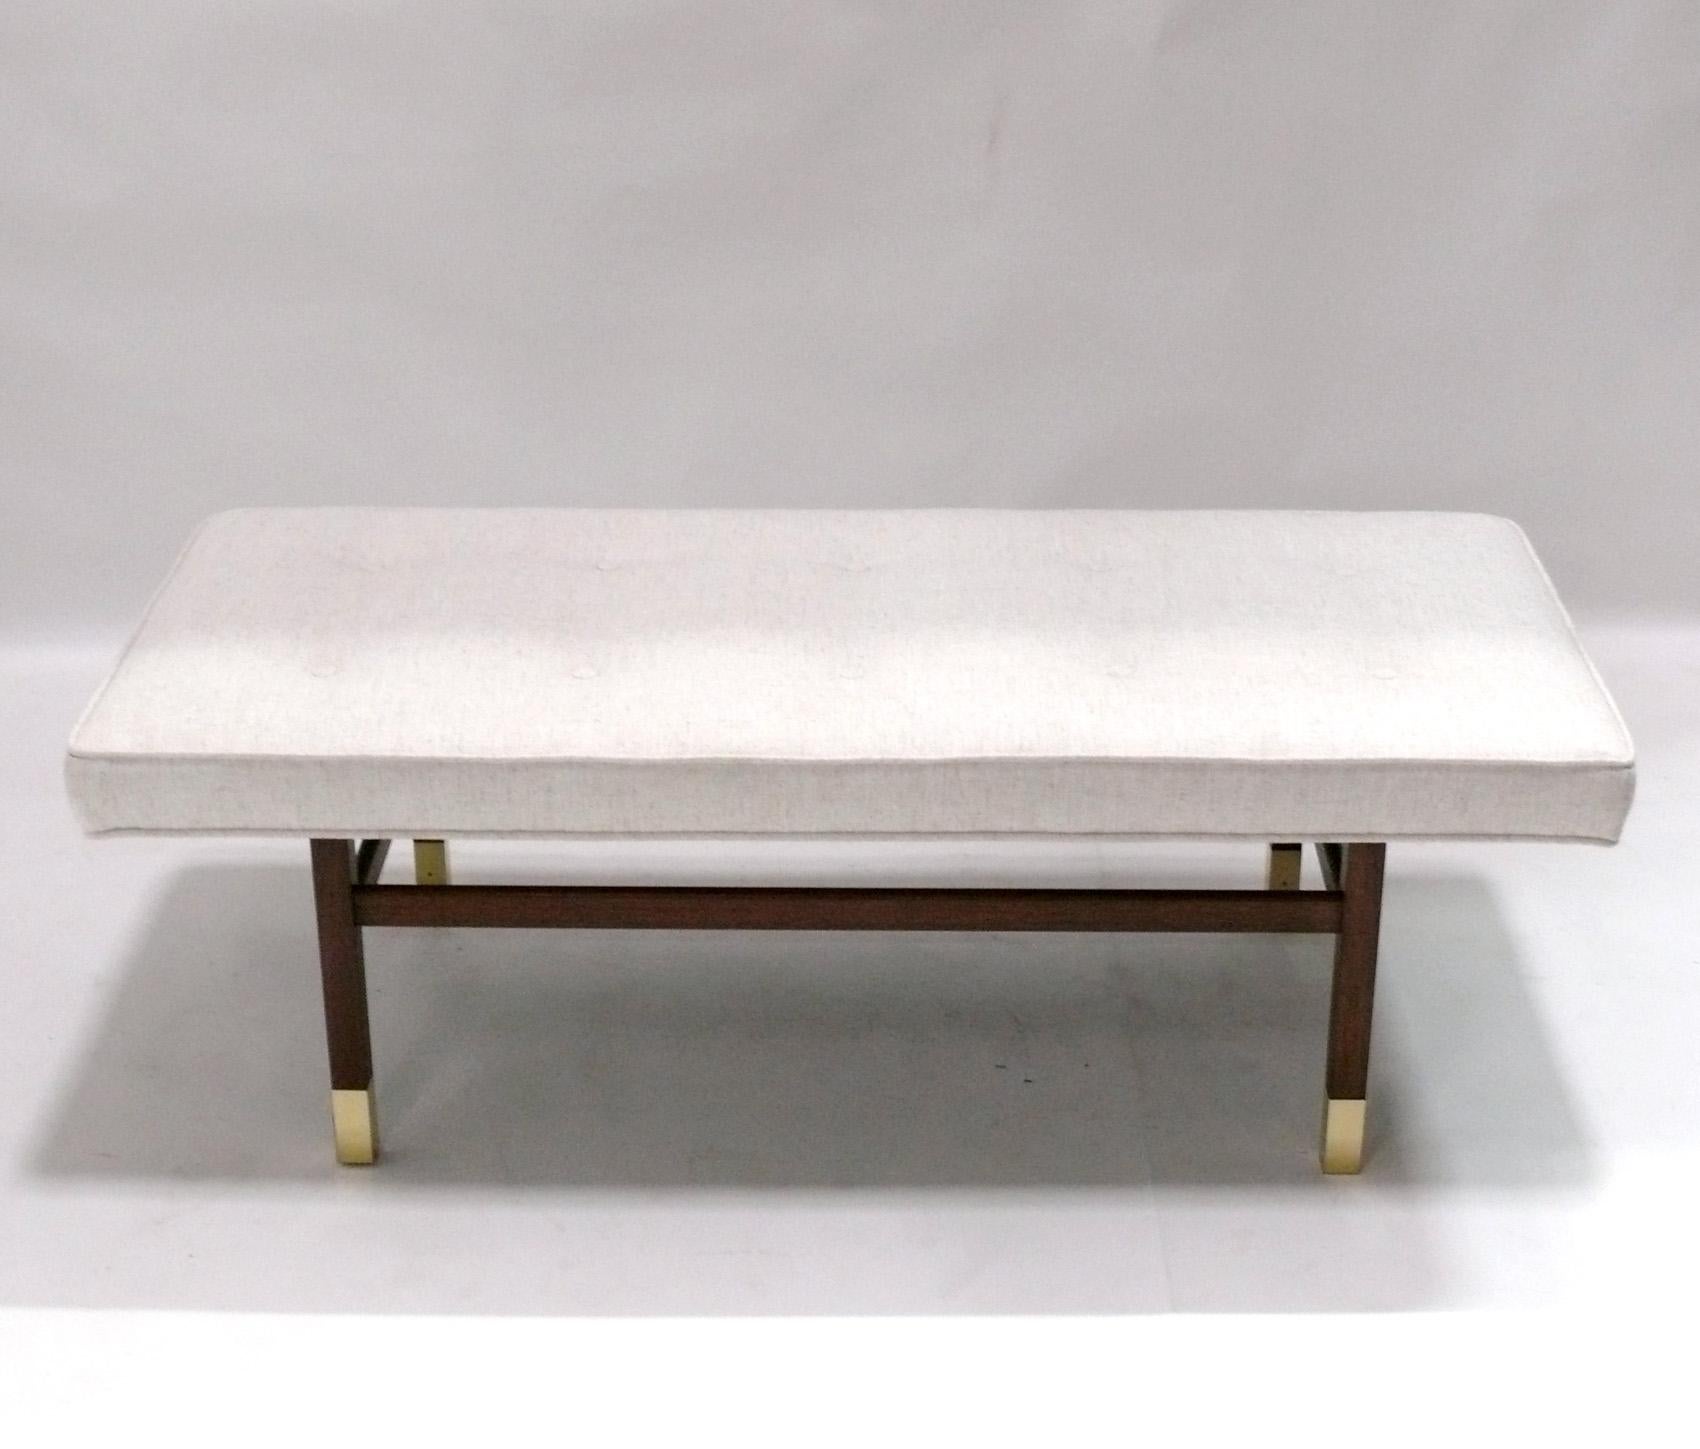 Clean Lined Mid Century Walnut Bench, attributed to Harvey Probber, unsigned, American, circa 1960s. It has been recently reupholstered in an ivory color herringbone fabric with all new foam.